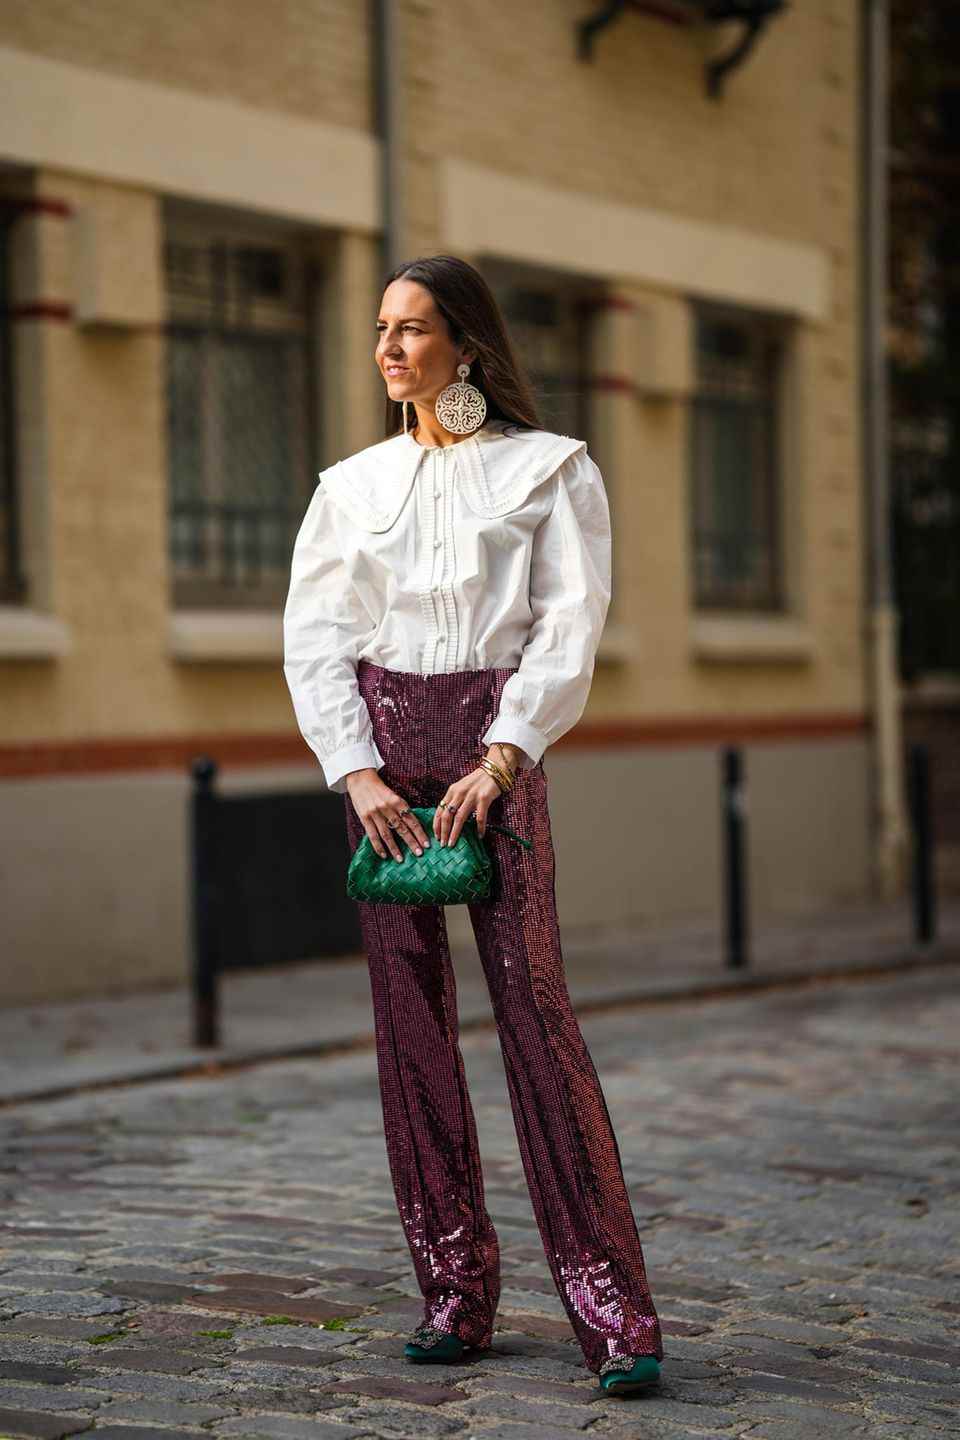 Daily glamour: 4 ways to style the sequin trend for everyday use